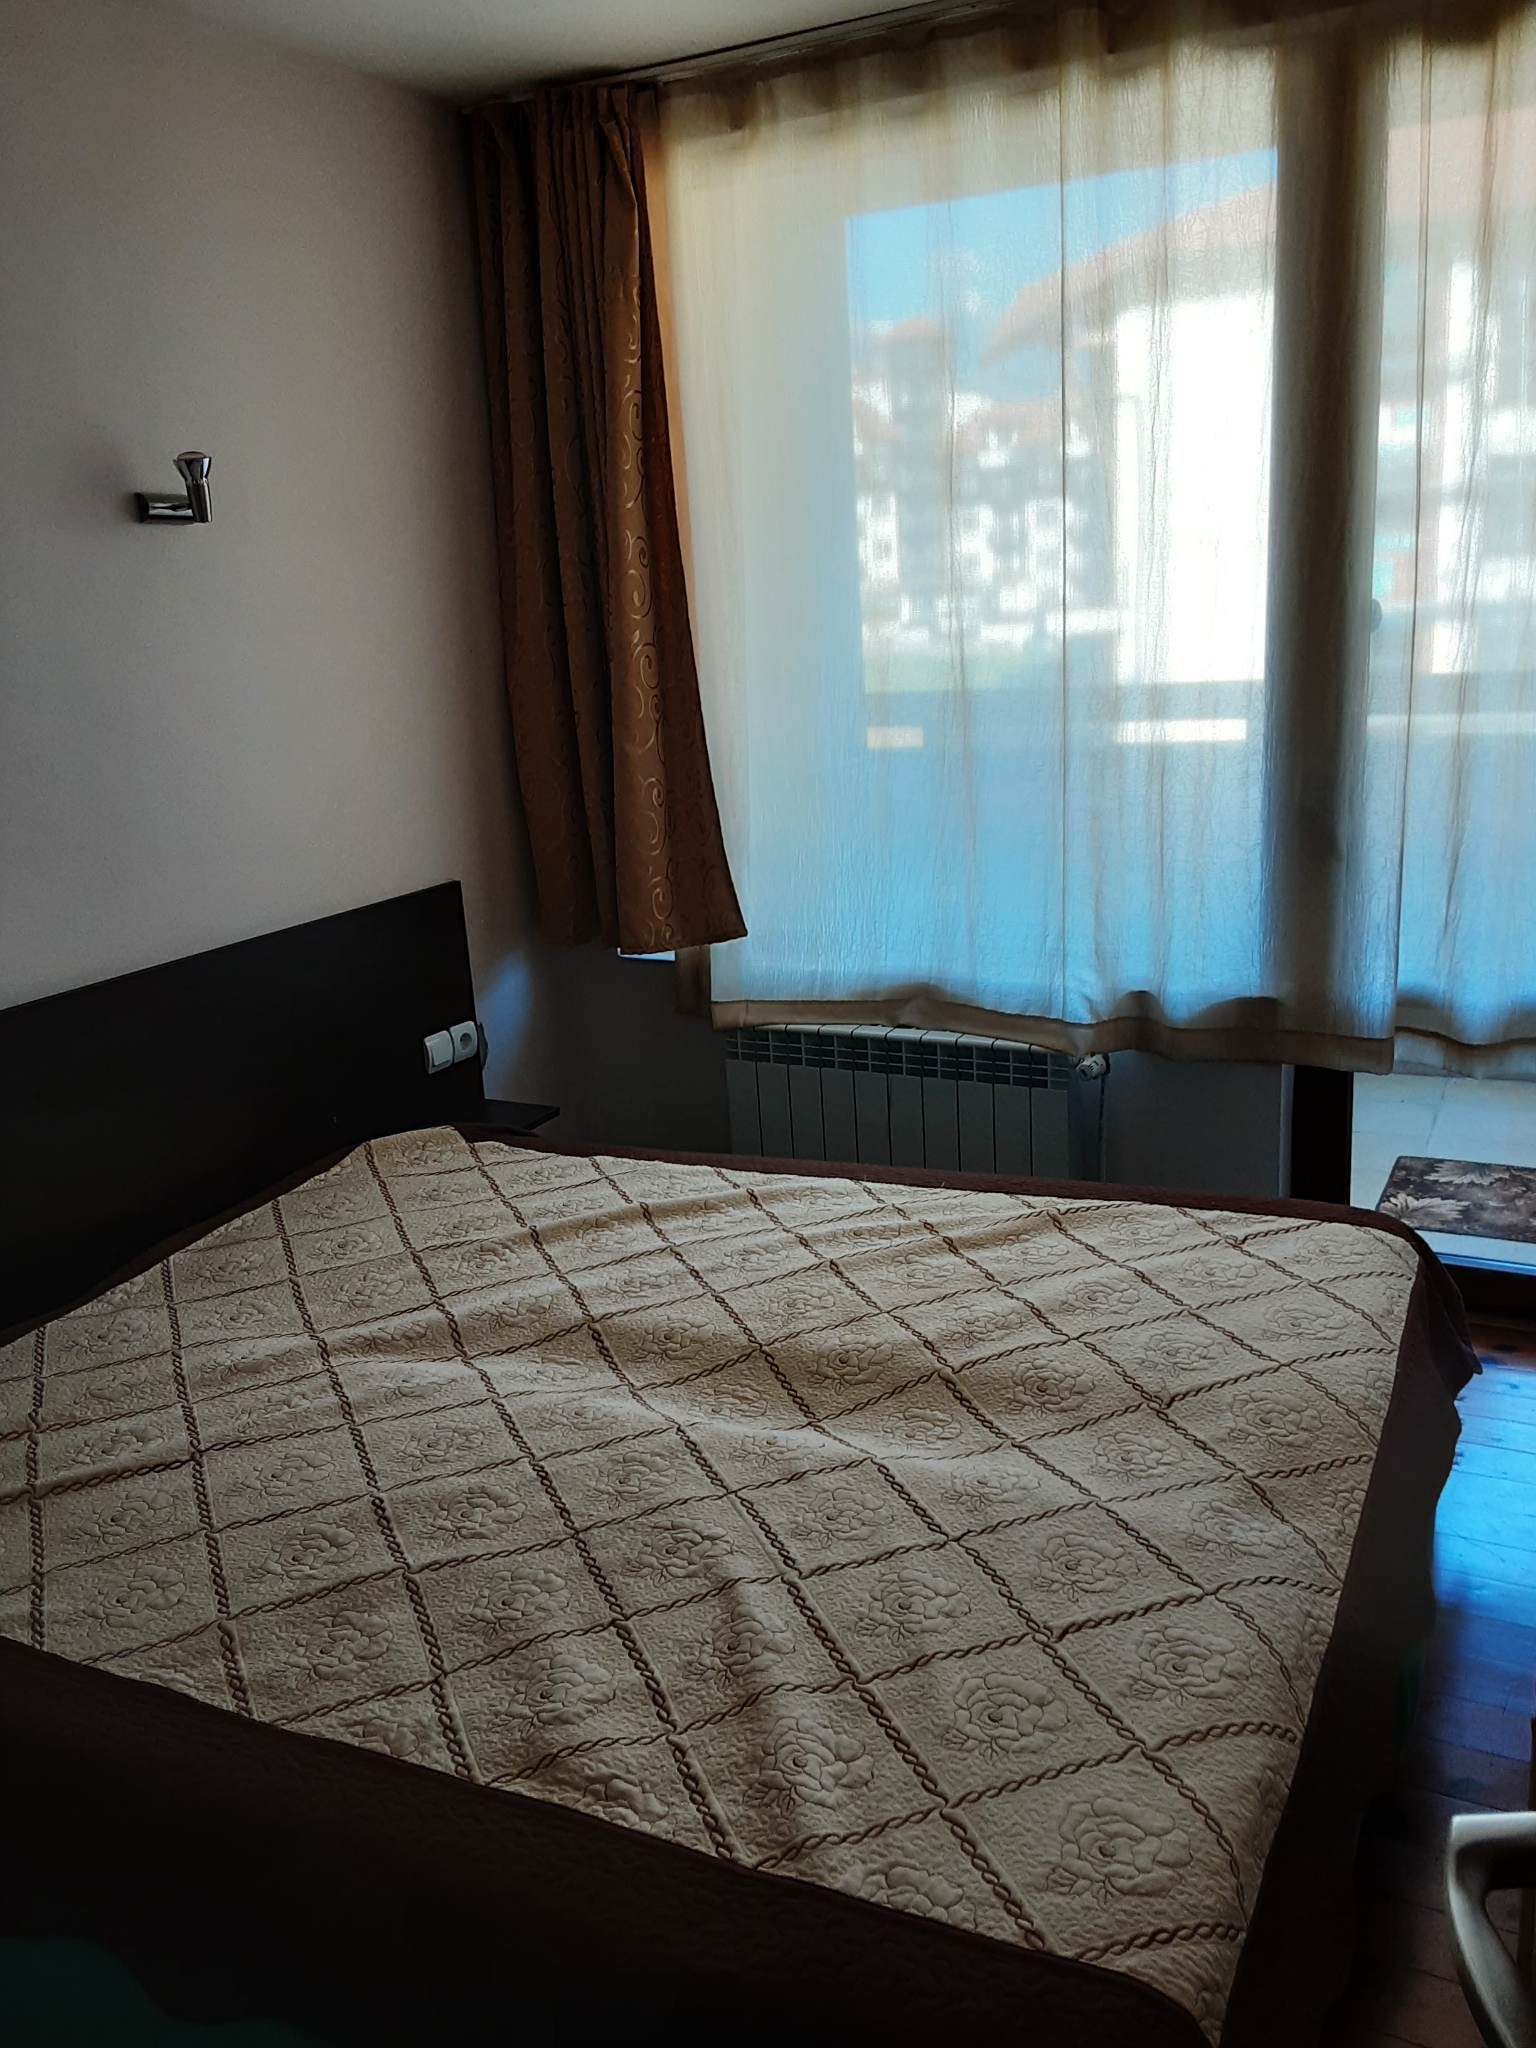 Spacious apartment with two bedrooms and a parking space in a well-maintained complex in Bansko